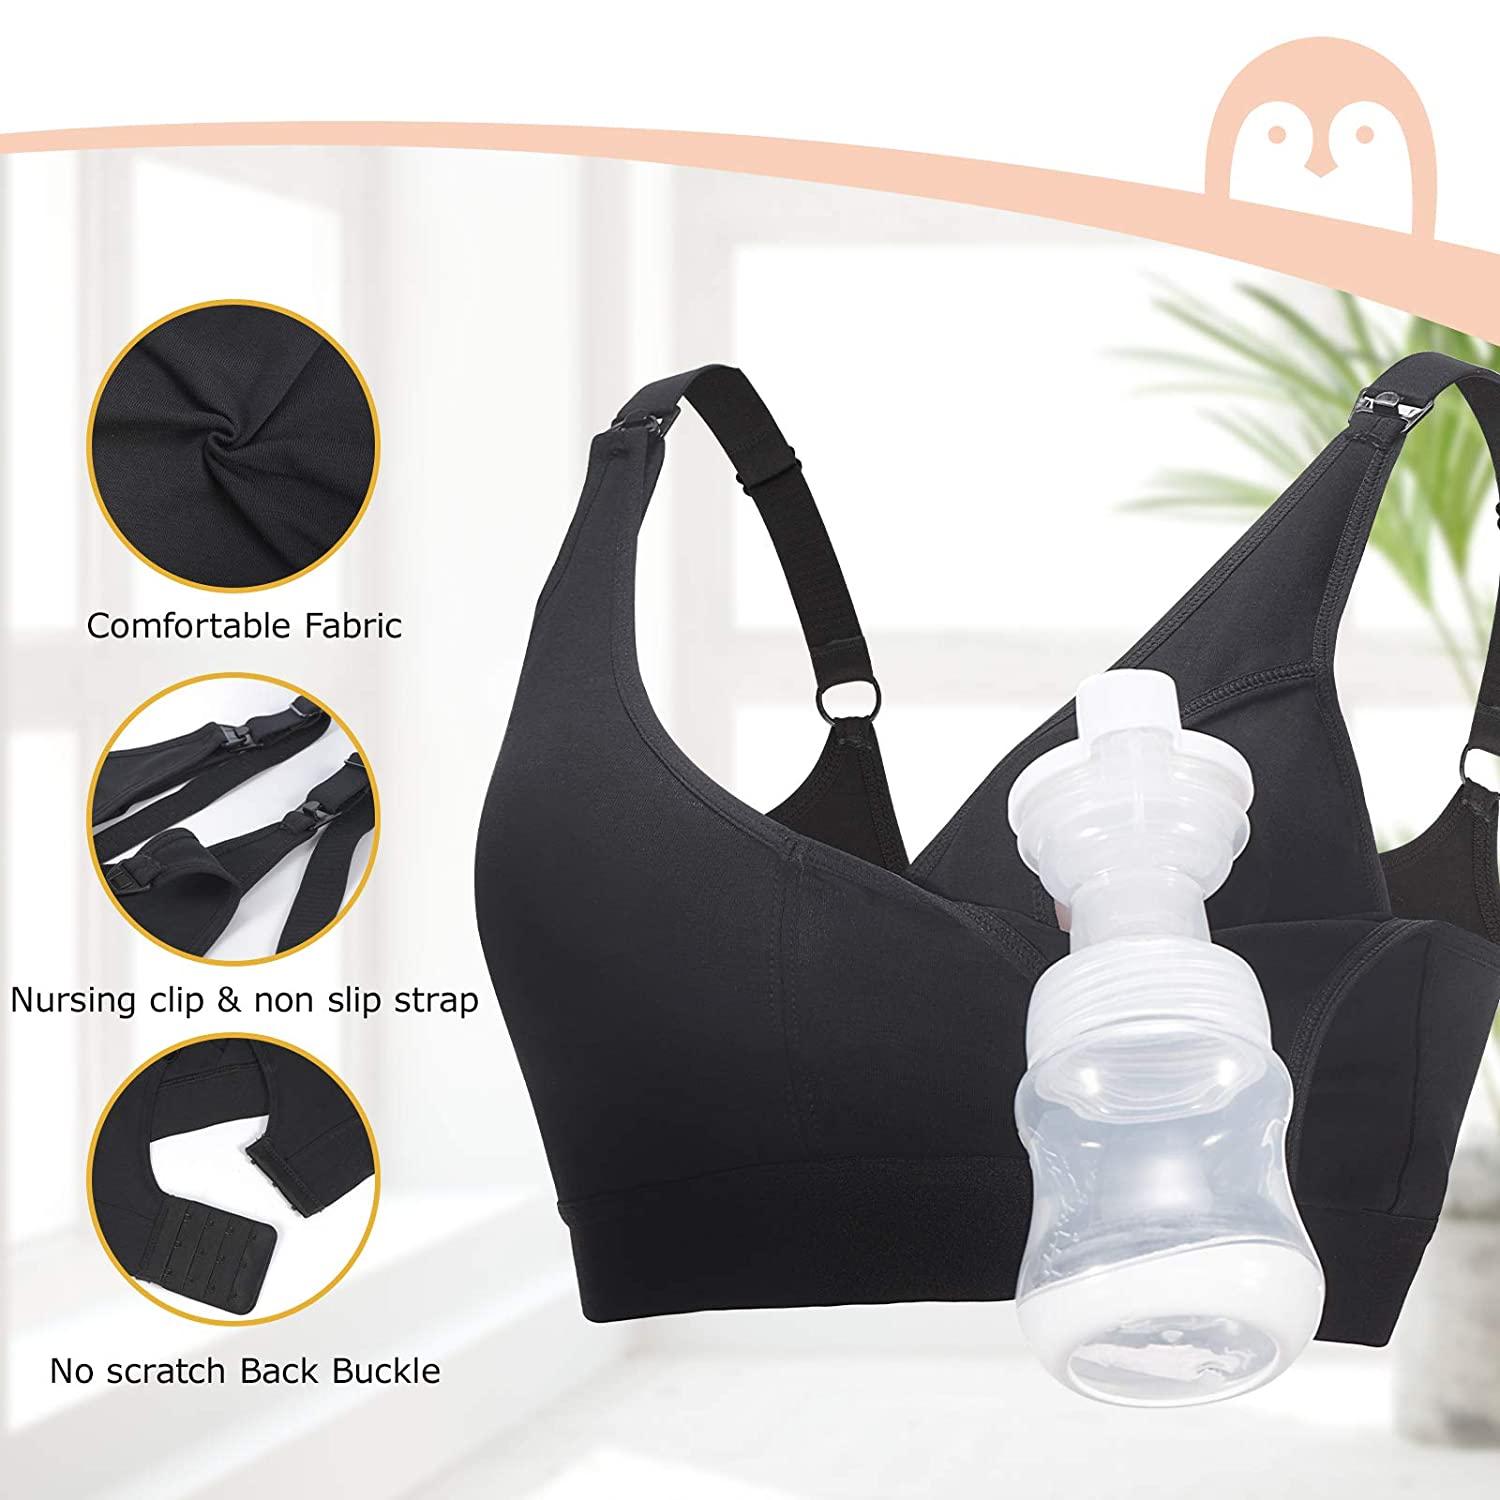 Momcozy on LinkedIn: The Perfect Plus-size, Soft Pumping Bra: Introducing  the Momcozy HF018